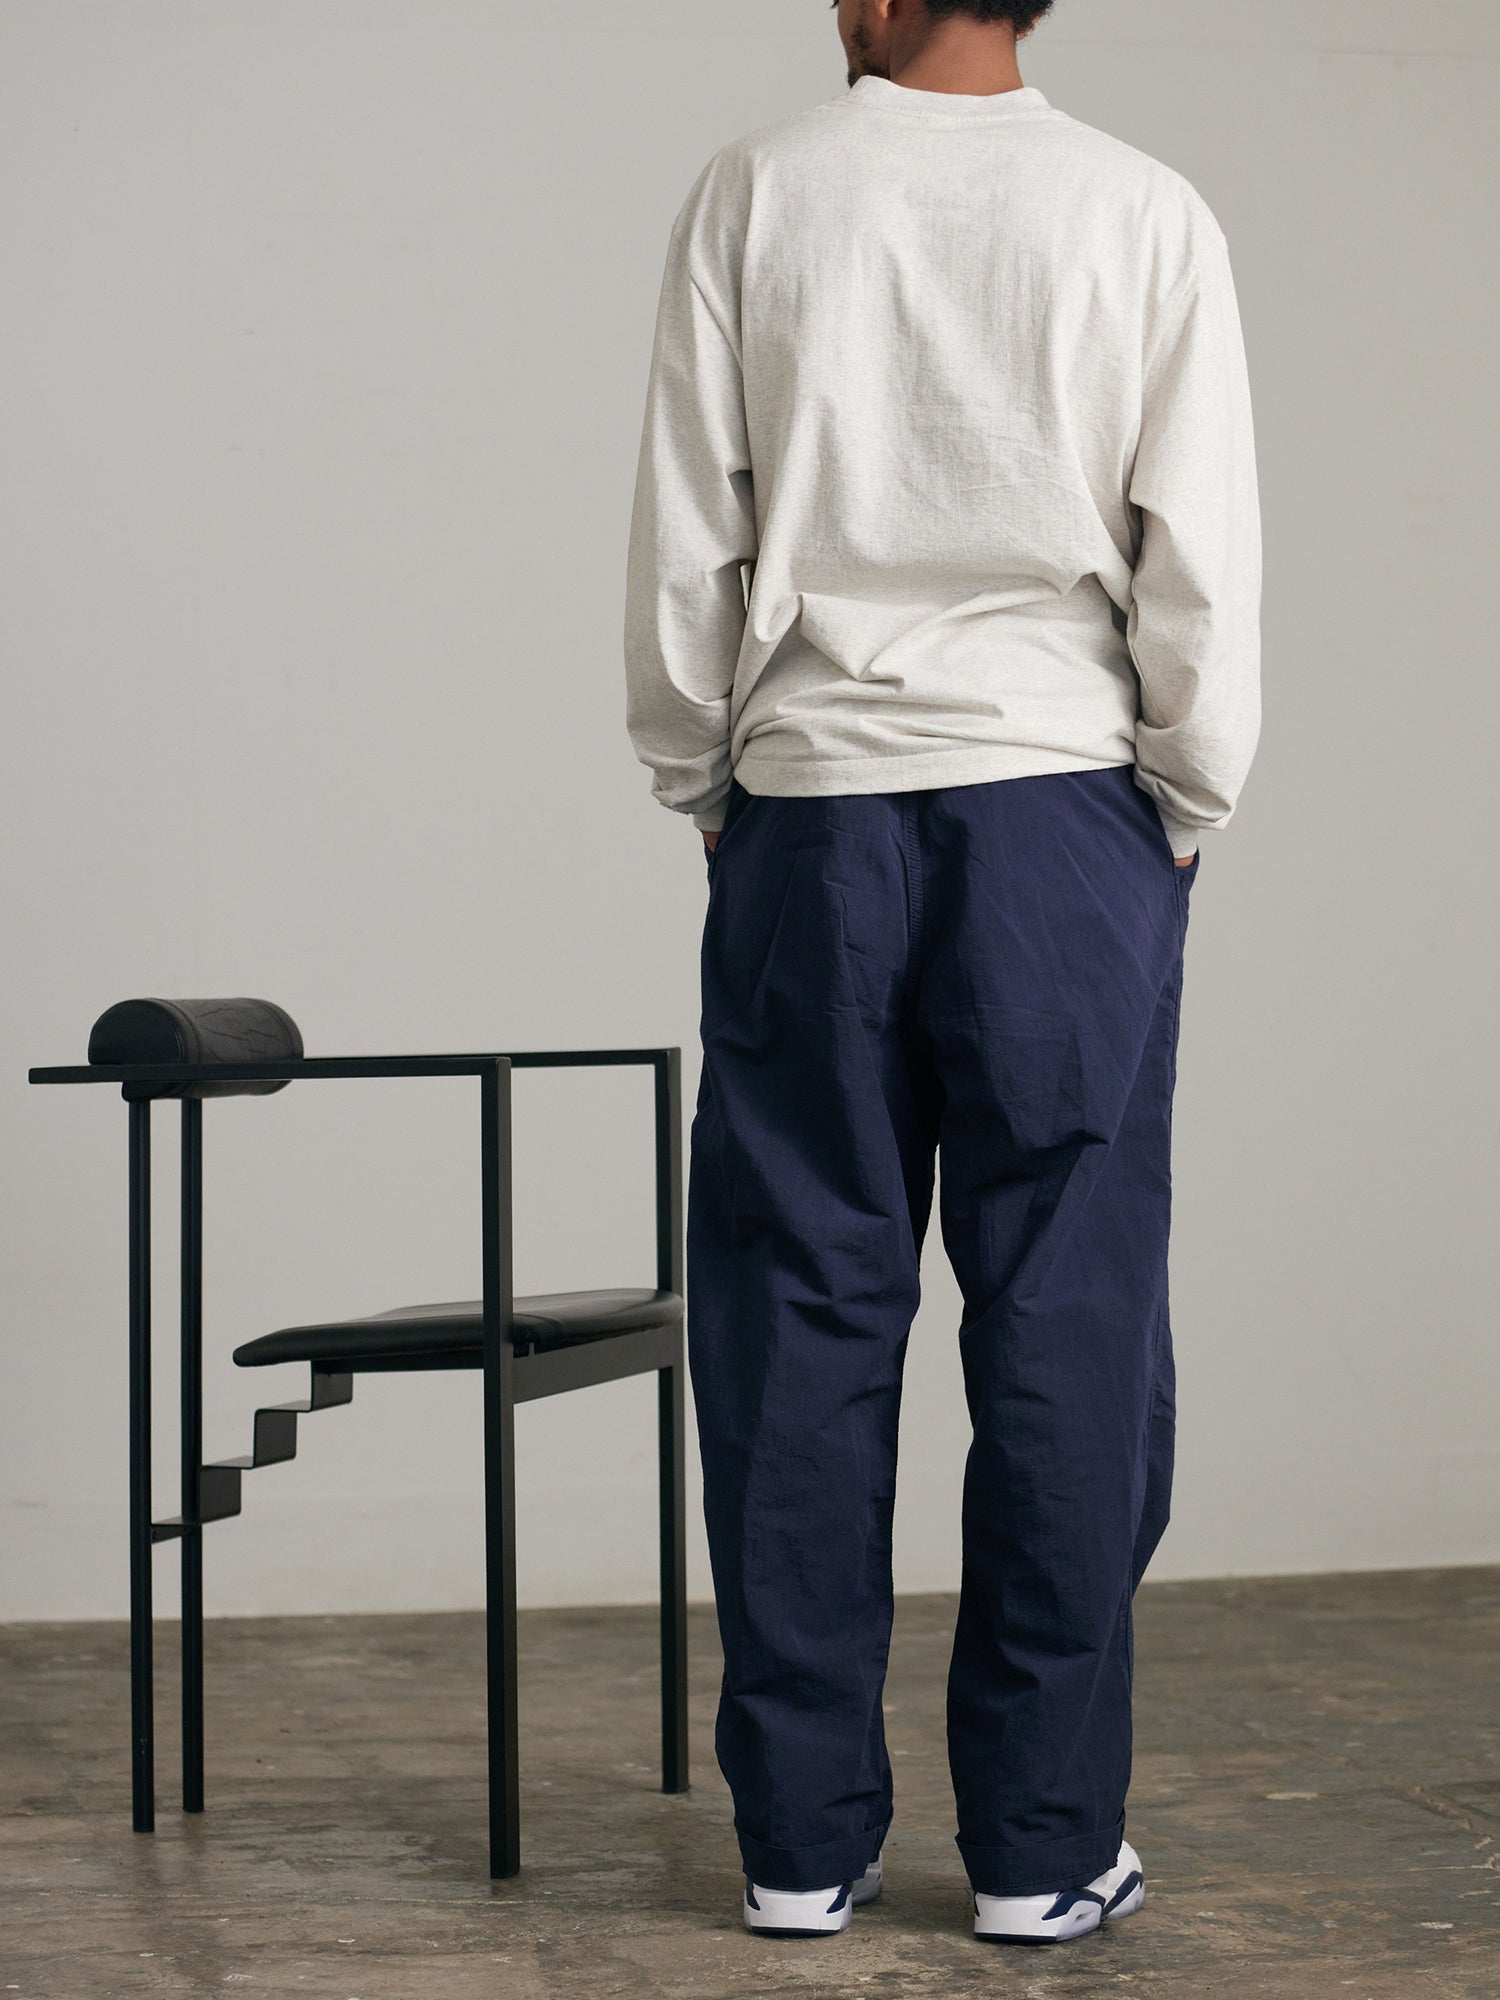 Ends and means Army Chino - パンツ